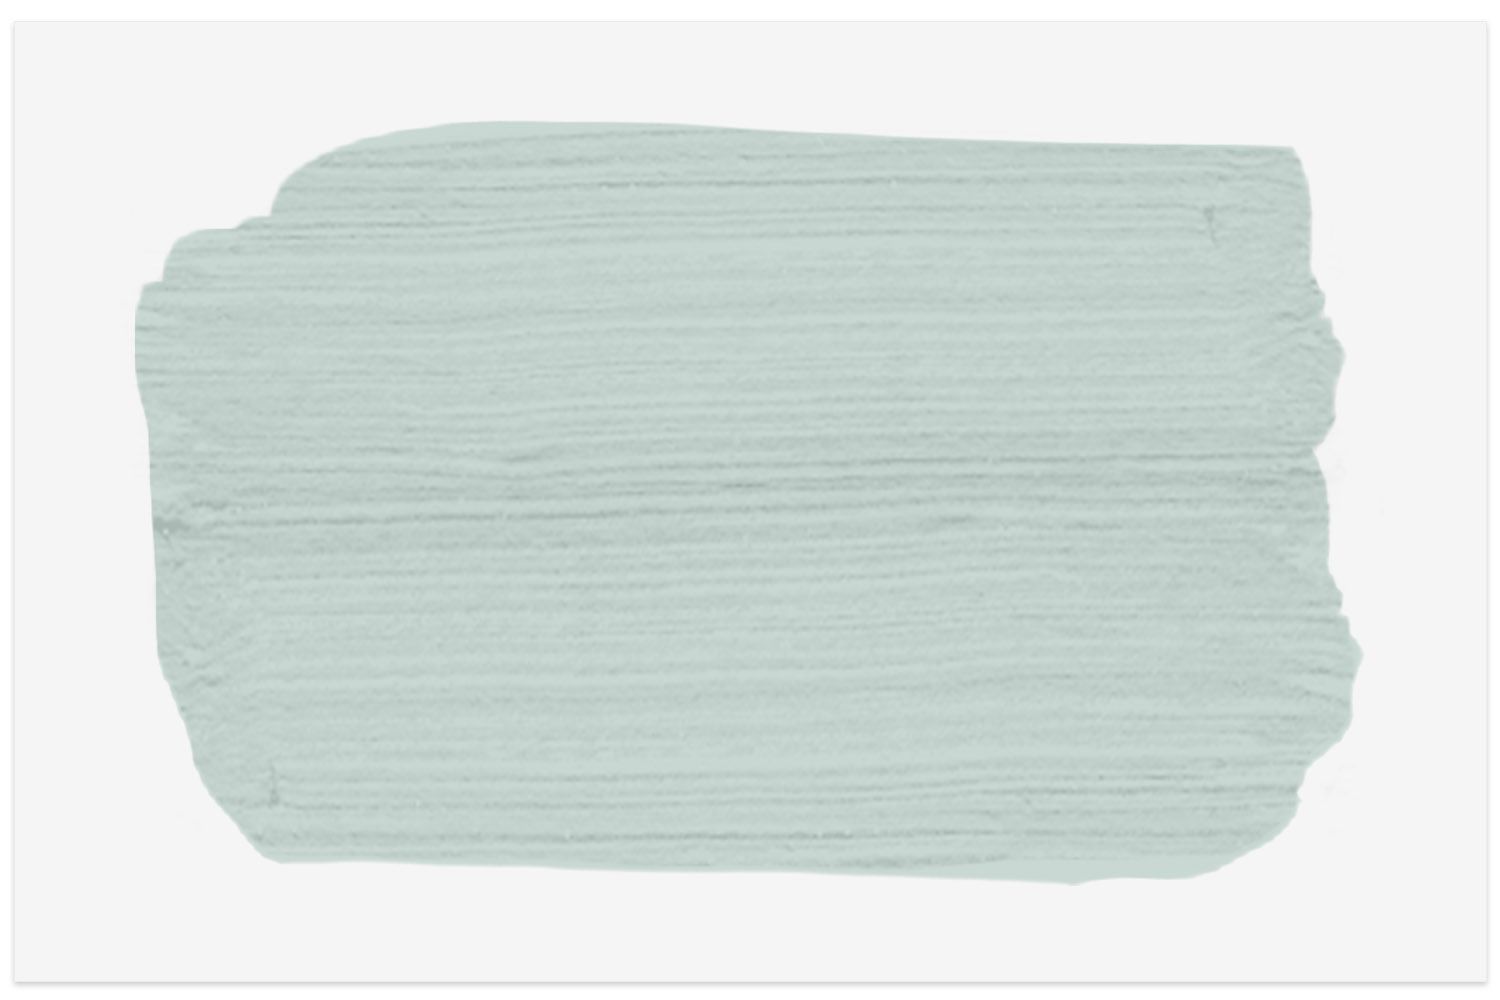 Distant Valley 5002-3A paint swatch from Valspar 